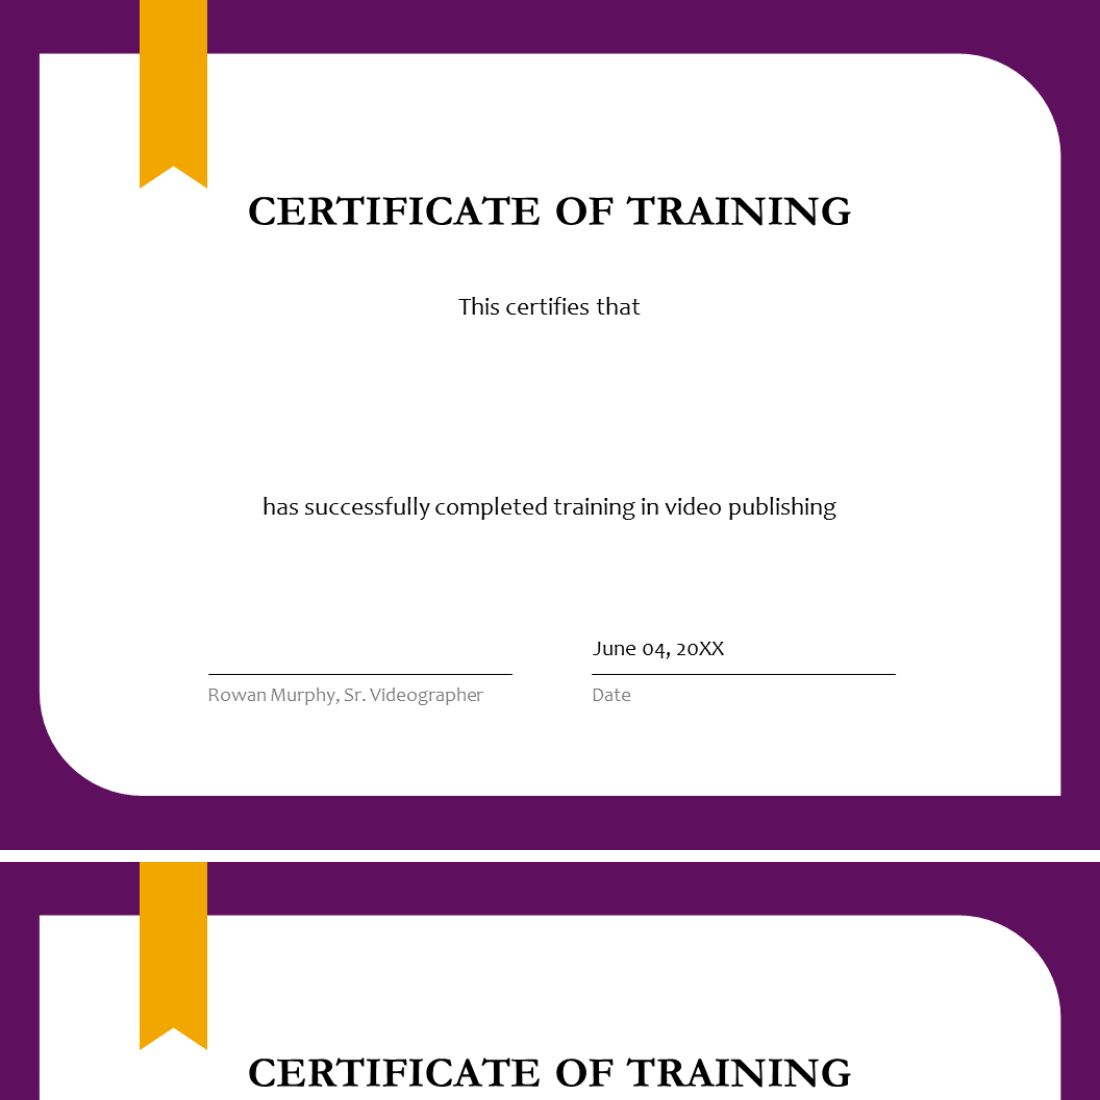 Certificate of training powerpoint presentation template preview image.